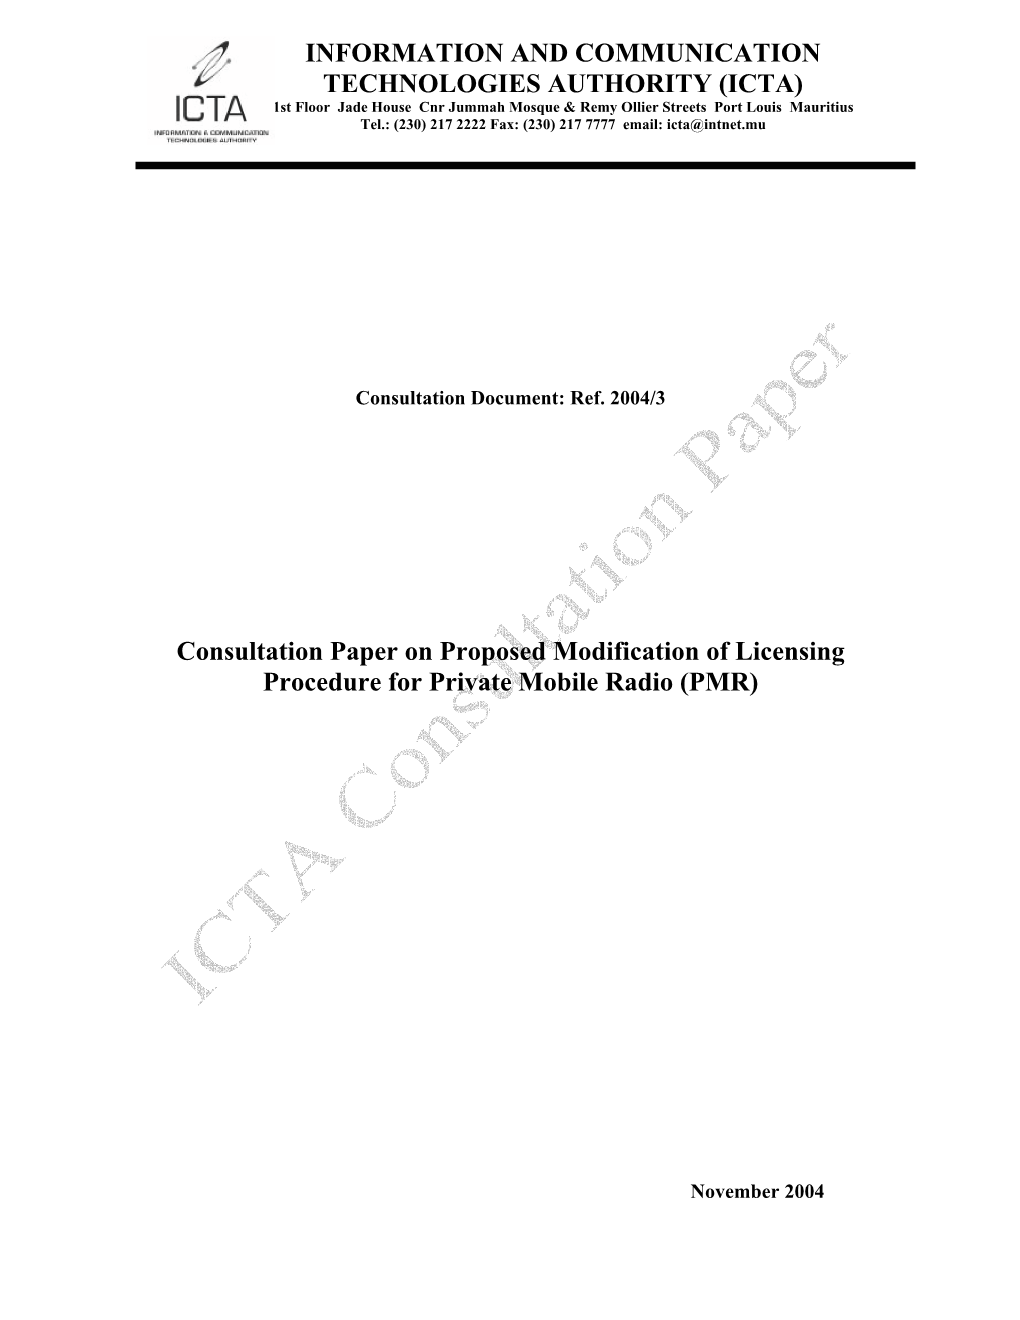 Consultation Paper on Proposed Modification of Licensing Procedure for Private Mobile Radio (PMR) INFORMATION and COMMUNICATION